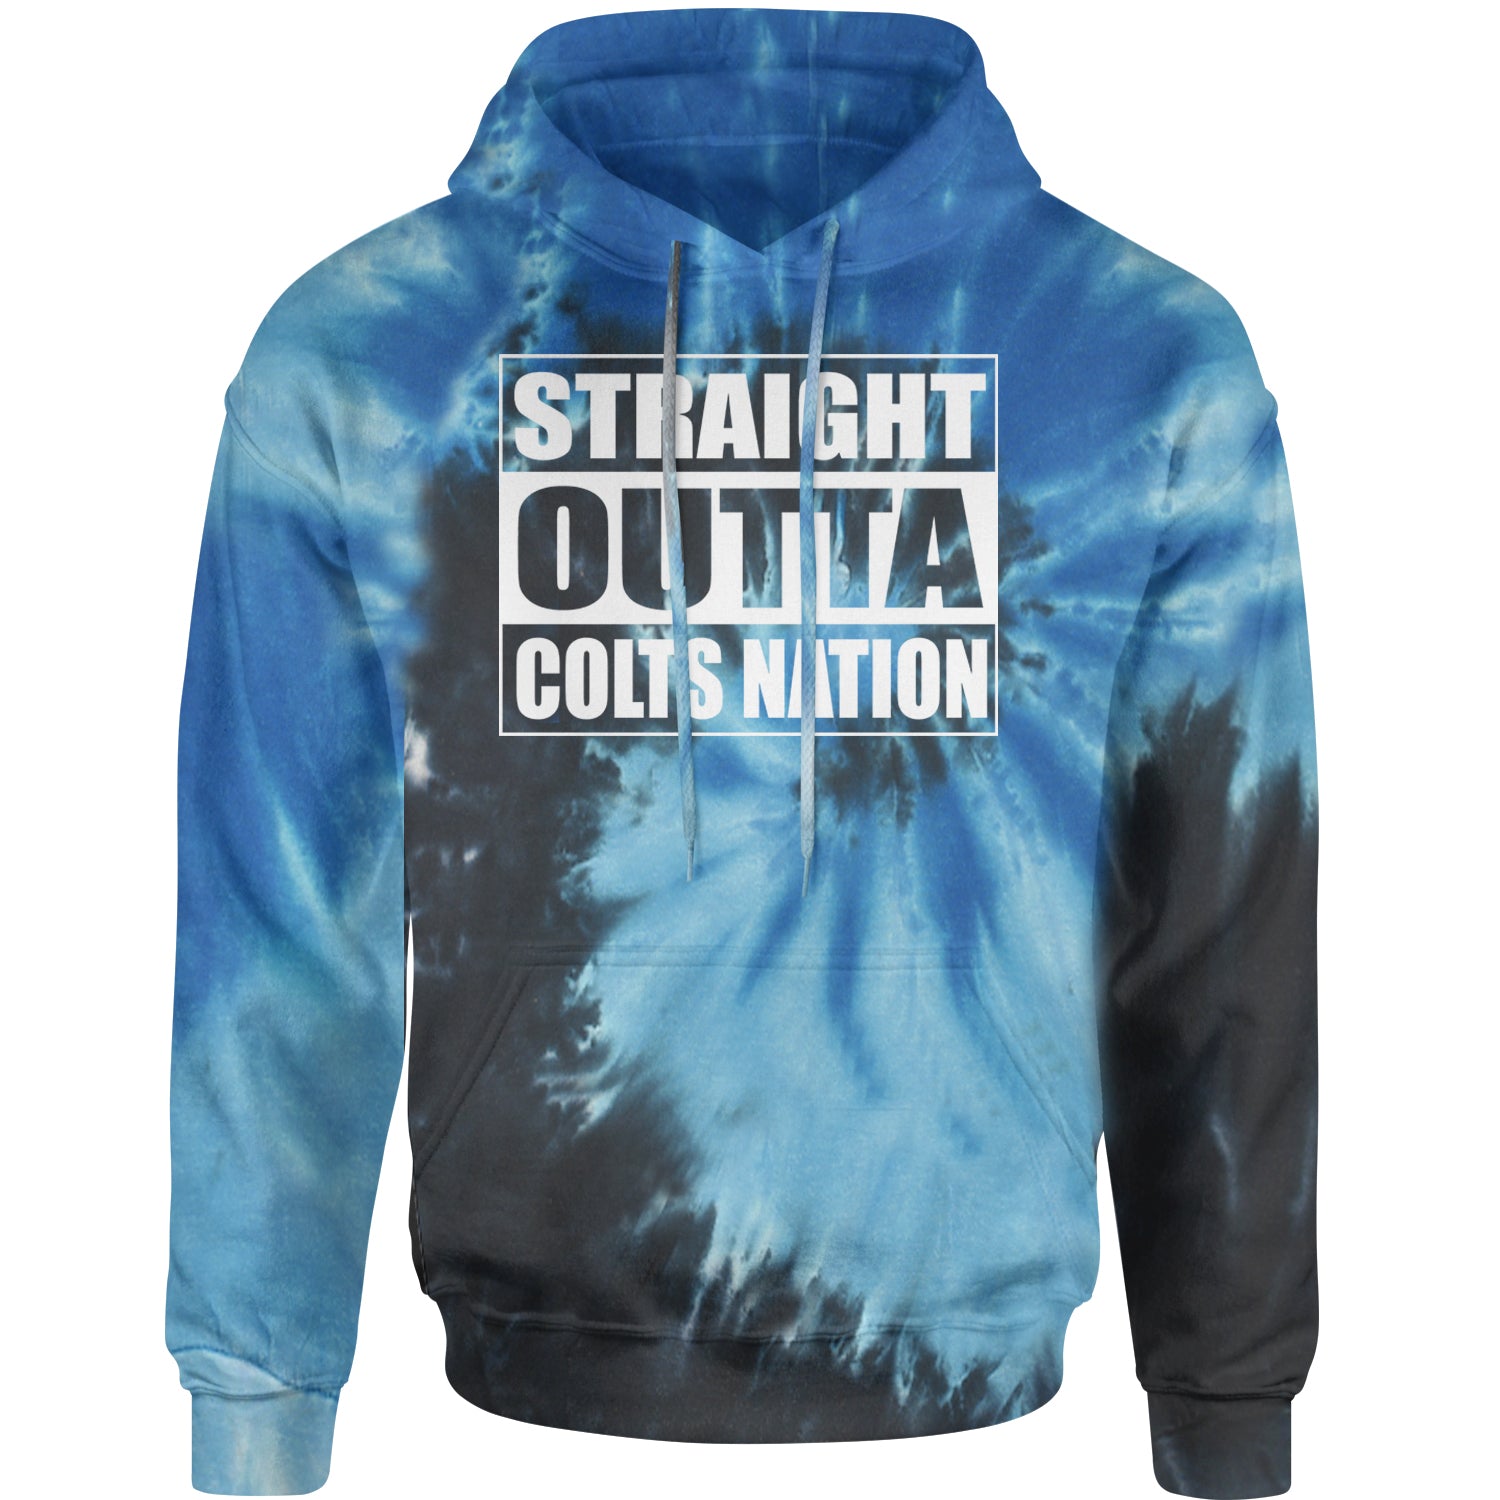 Expression Tees Straight Outta Colts Nation Football Adult Hoodie Sweatshirt - Black Hoodie Large